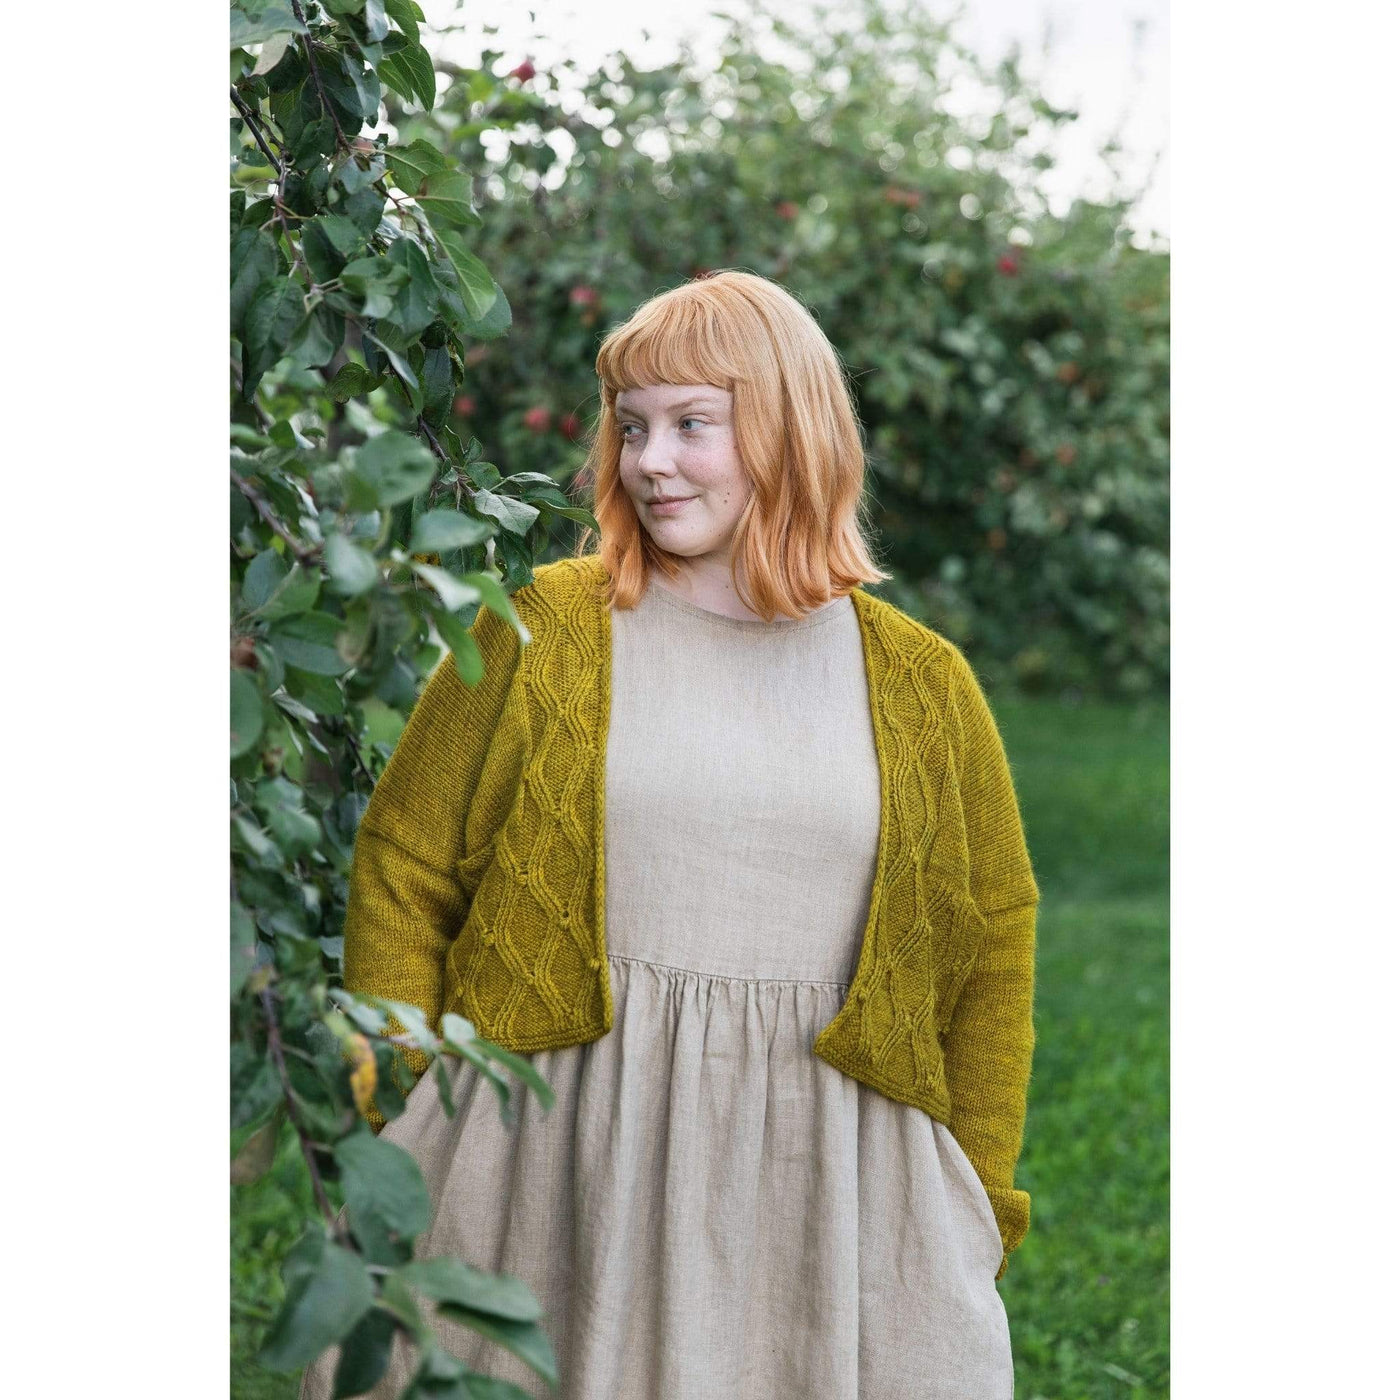 The Woolly Thistle Worsted – A Knitwear Collection Curated by Aimée Gille of La Bien Aimée published by Laine woman wearing mustard yellow knitted cardigan